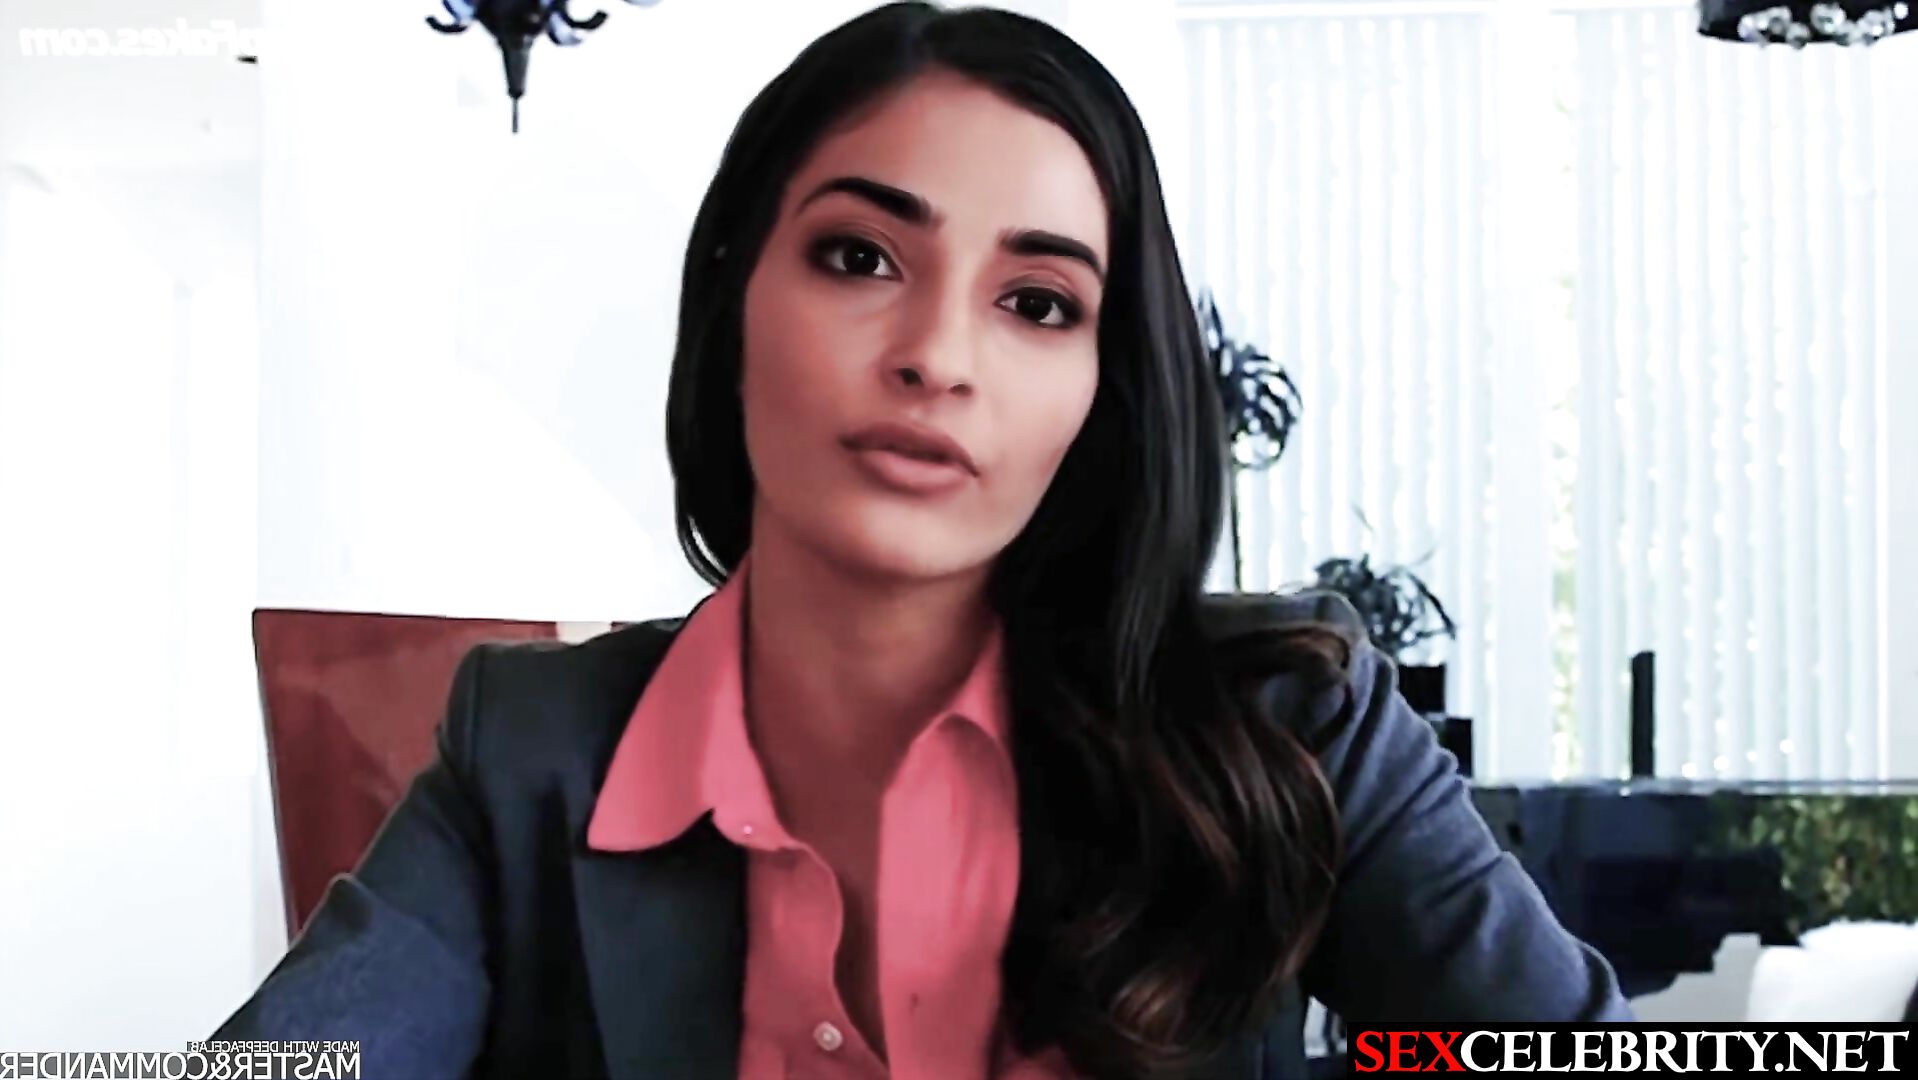 Pussy of Sonam Kapoor intensively fucked deepfake sex tape SexCelebrity